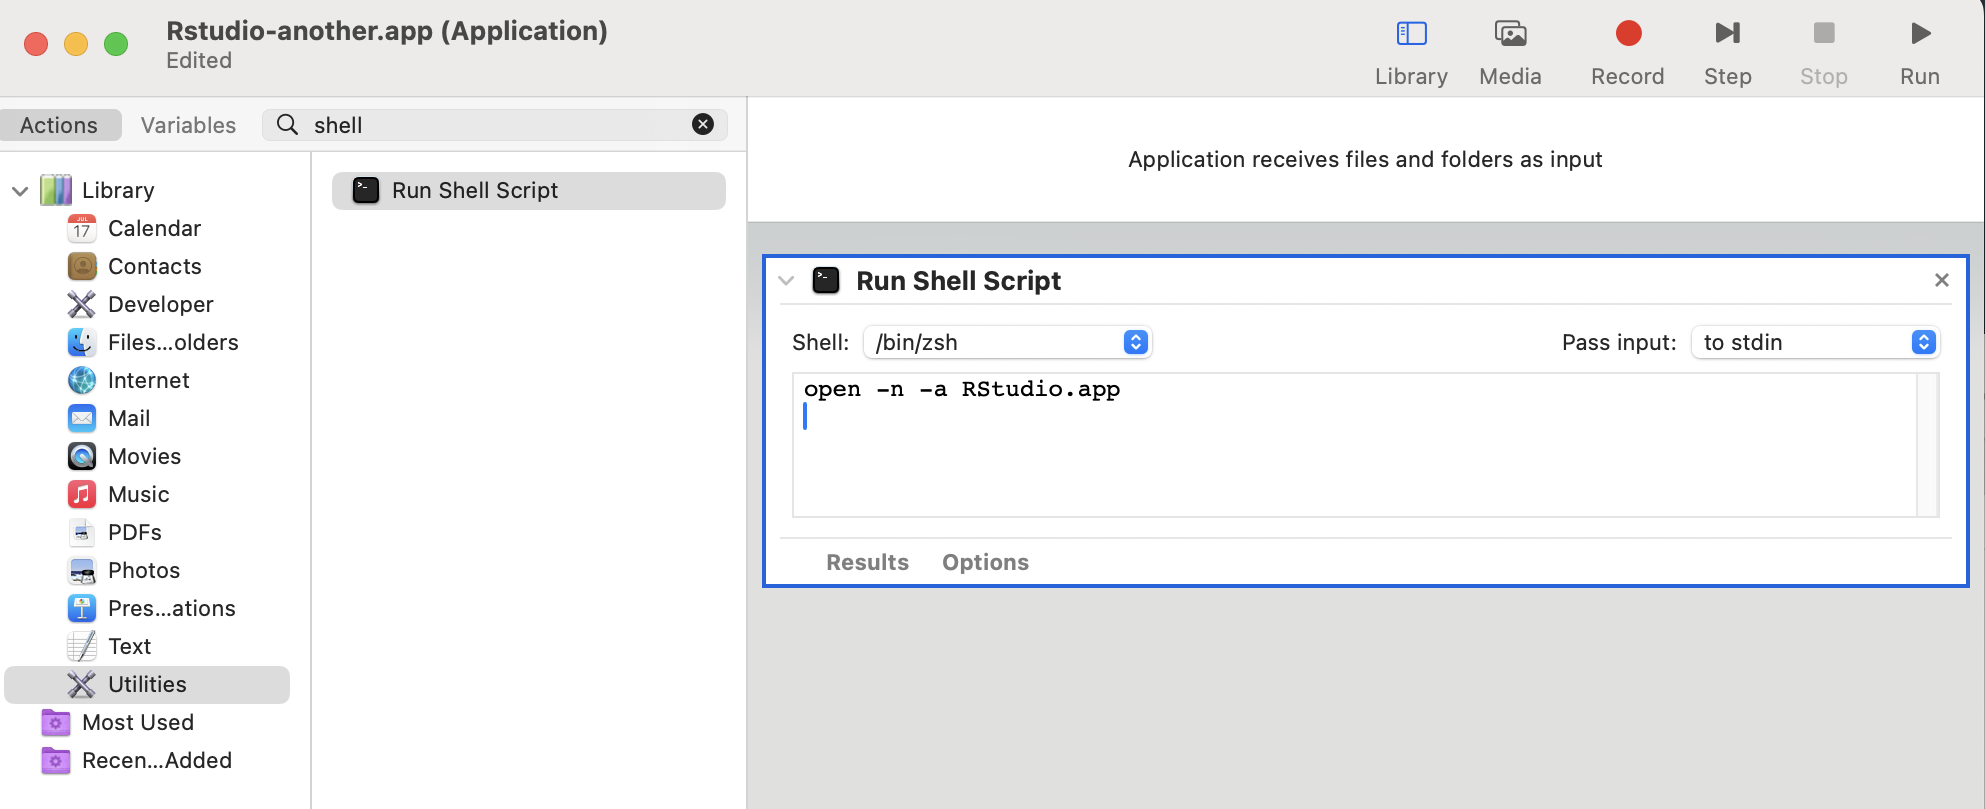 Screenshot of configuring the automator app to run a shell script to open a new instance of RStudio Desktop.